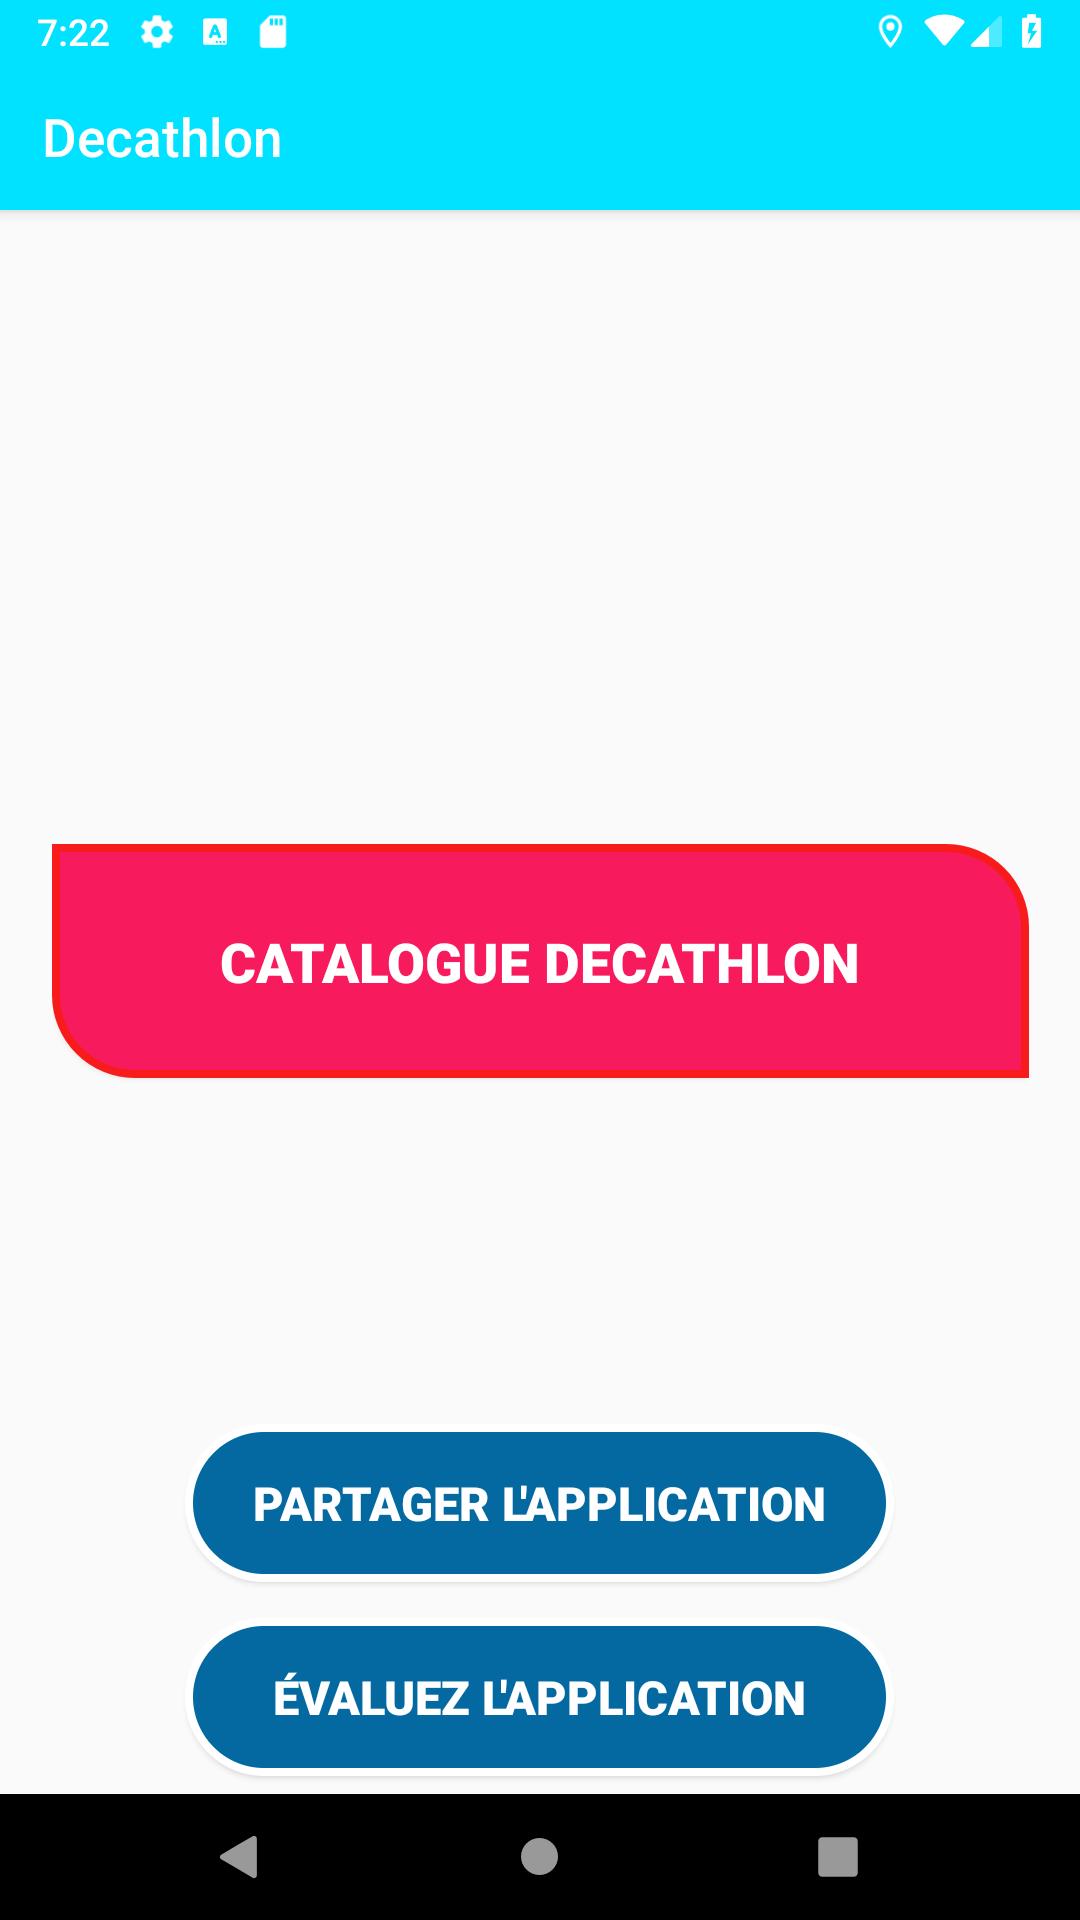 Catalogue decathlon for Android - APK Download